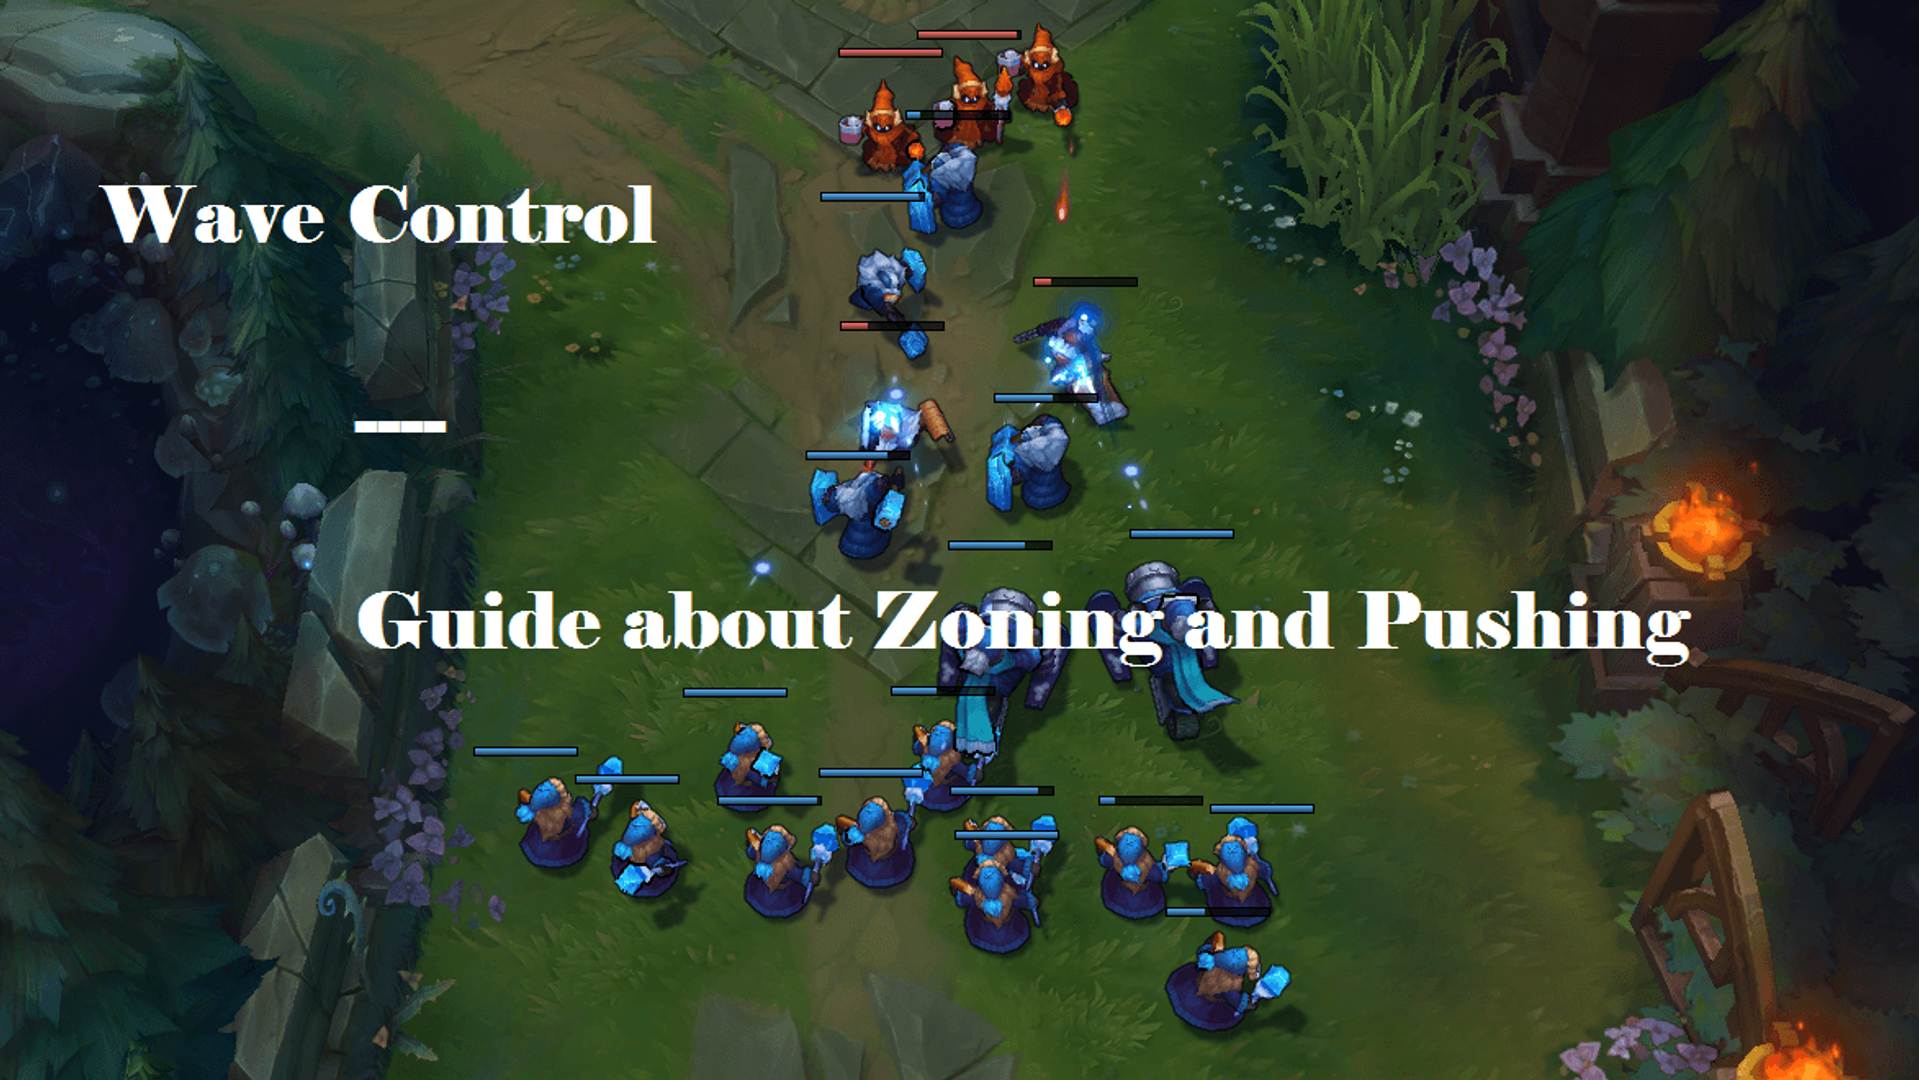 Wave Control: A Guide About Zoning and Pushing